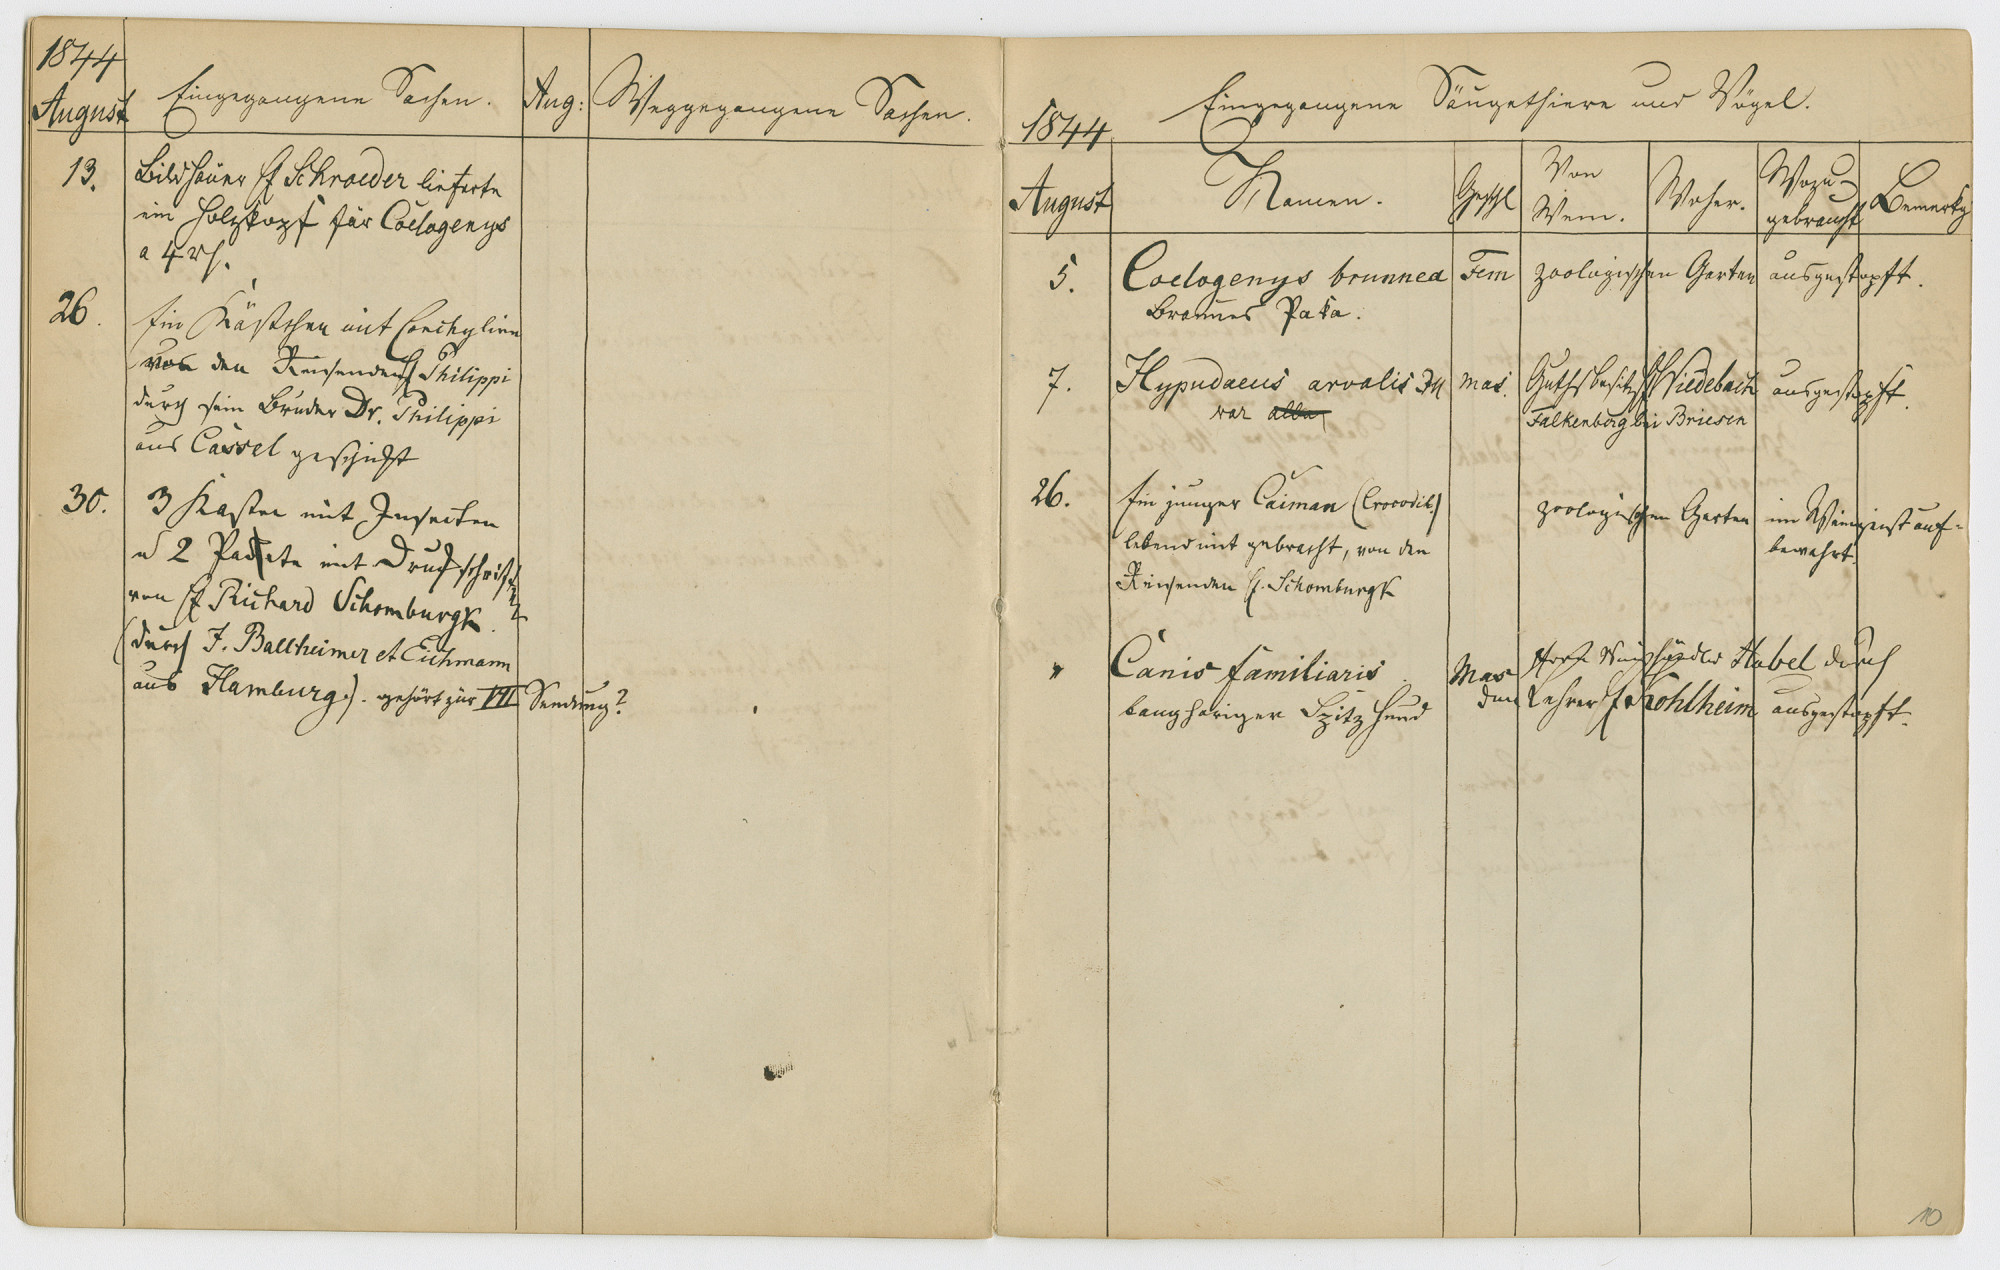 A double page of an open notebook reveals handwritten entries for the month of August 1844 in a hand-drawn table. 